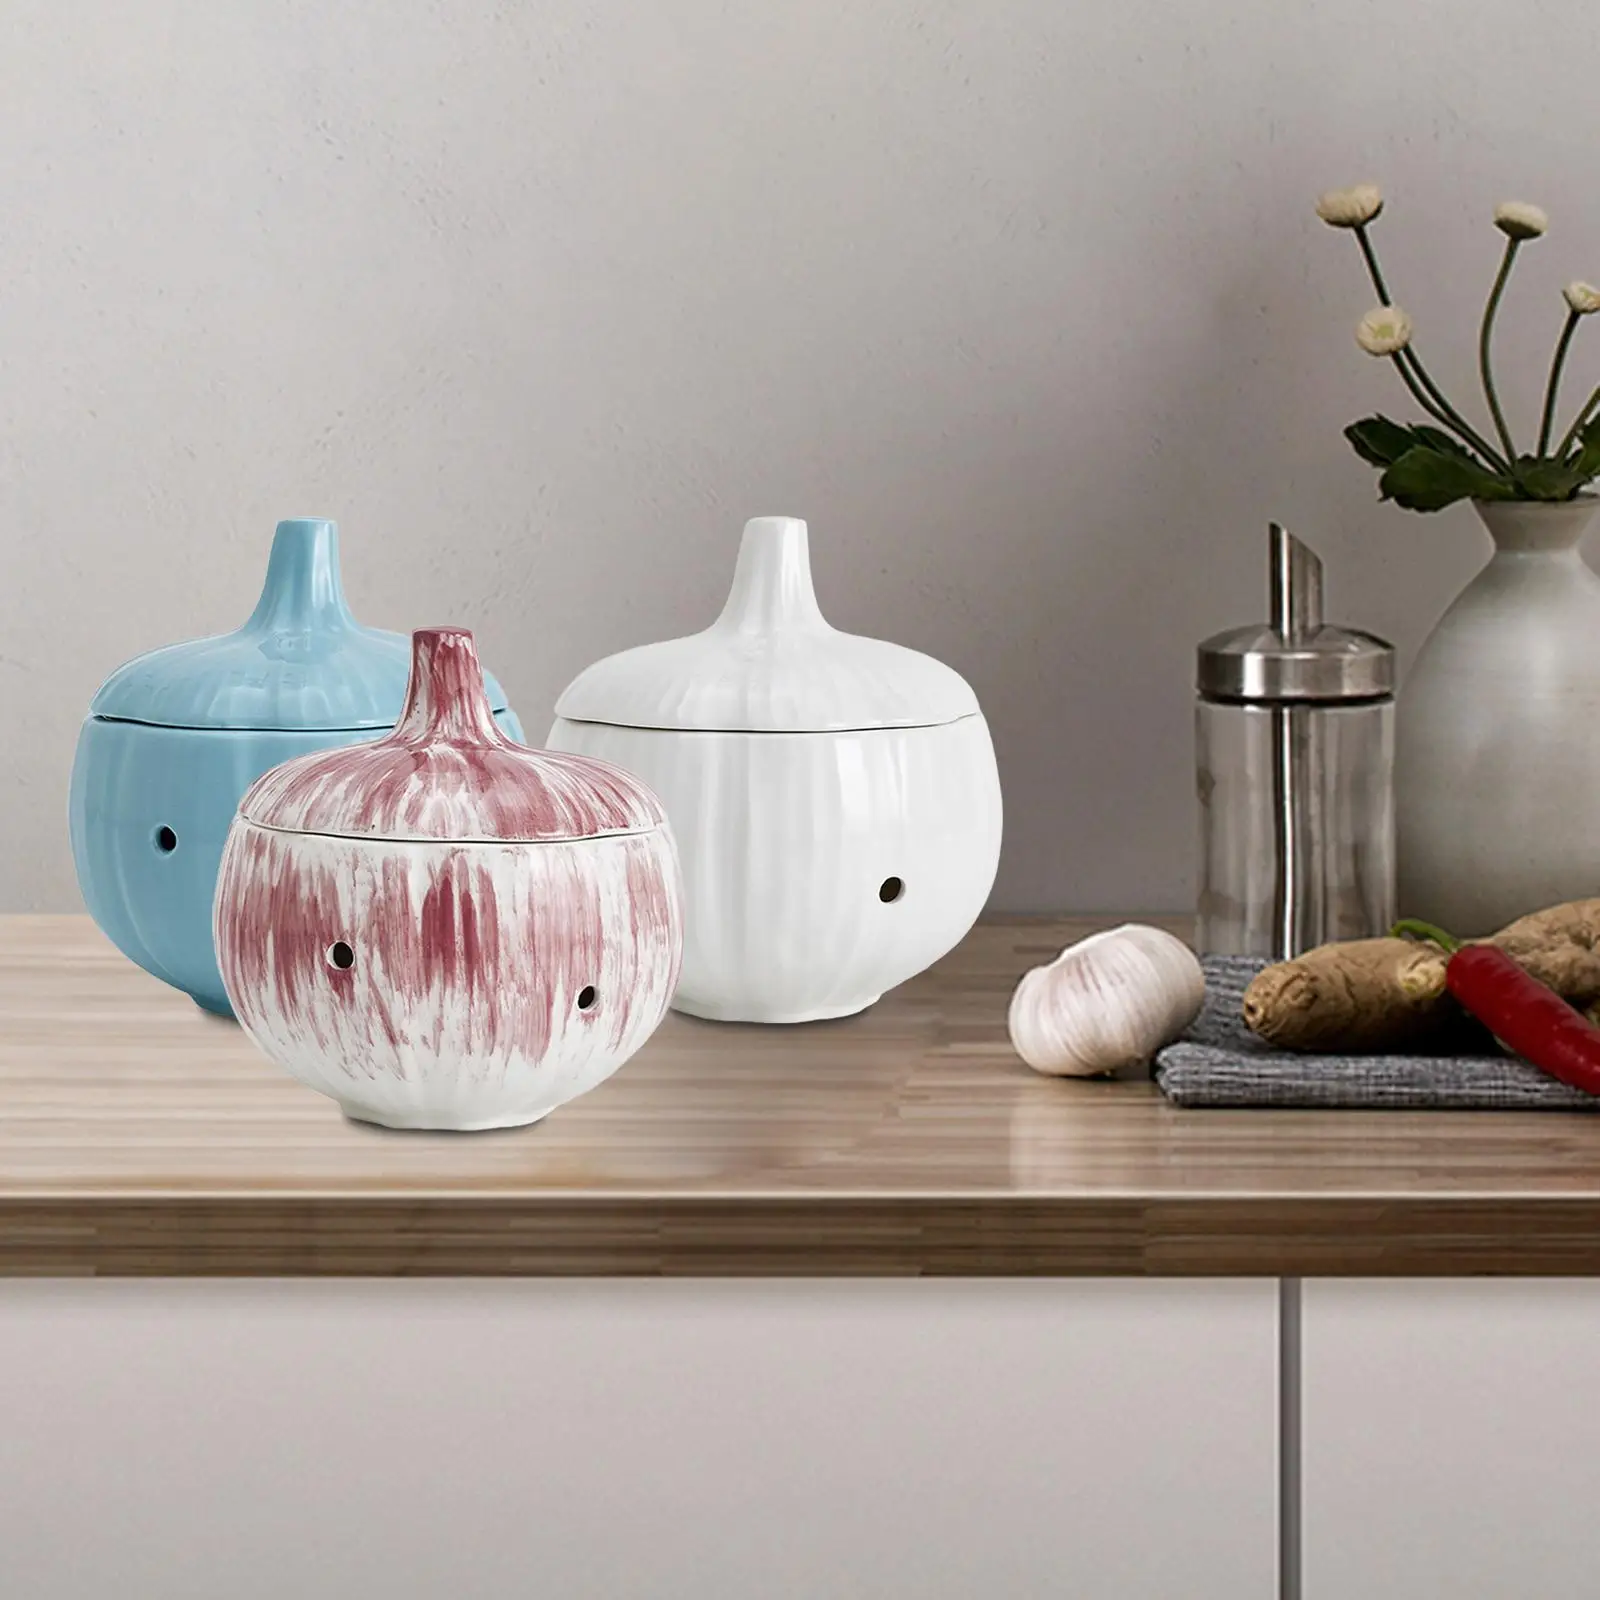 Ceramic Garlic Keeper Garlic Container Saver with Lids Canister Collection Round Holder for Home Kitchen Onion Ginger